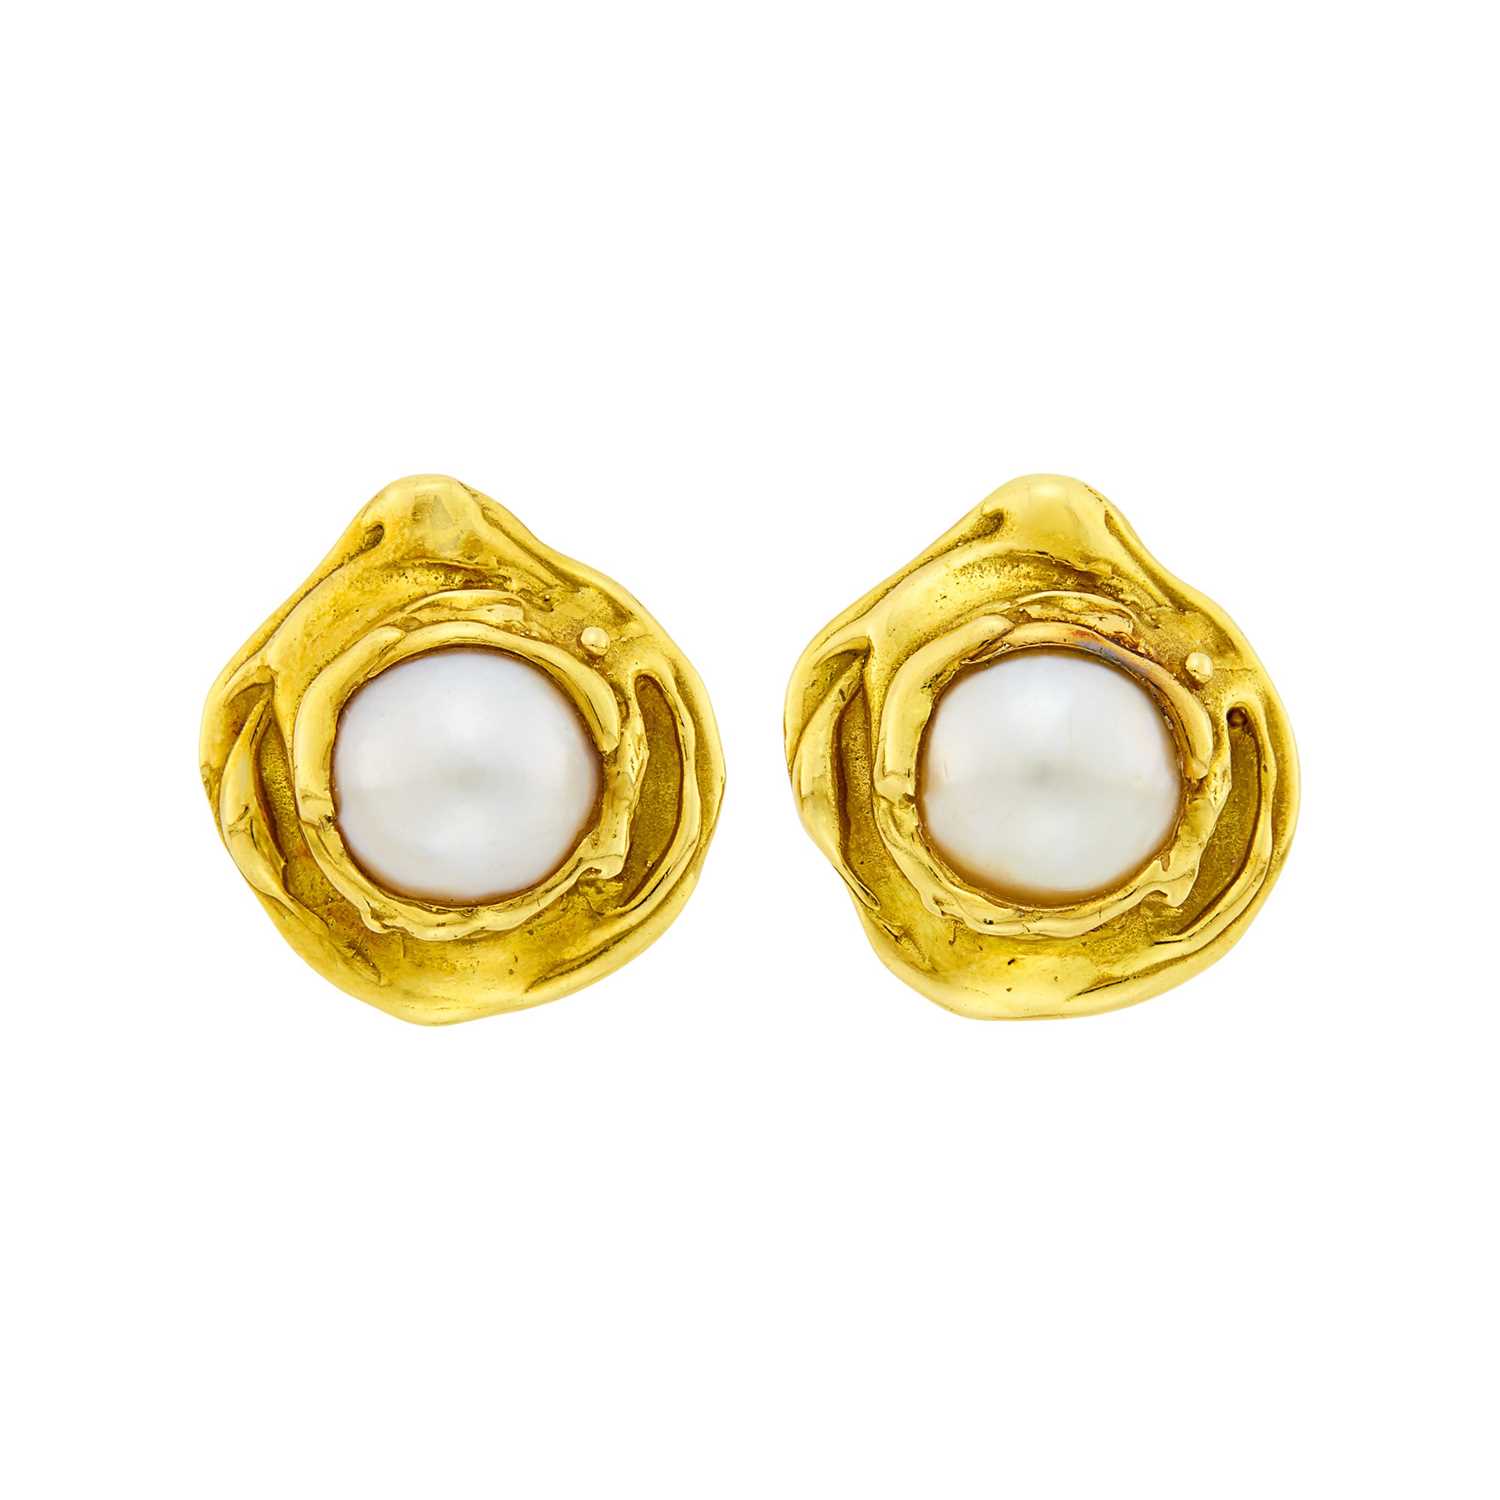 Lot 72 - Elizabeth Gage Pair of Gold and Mabé Pearl Earclips